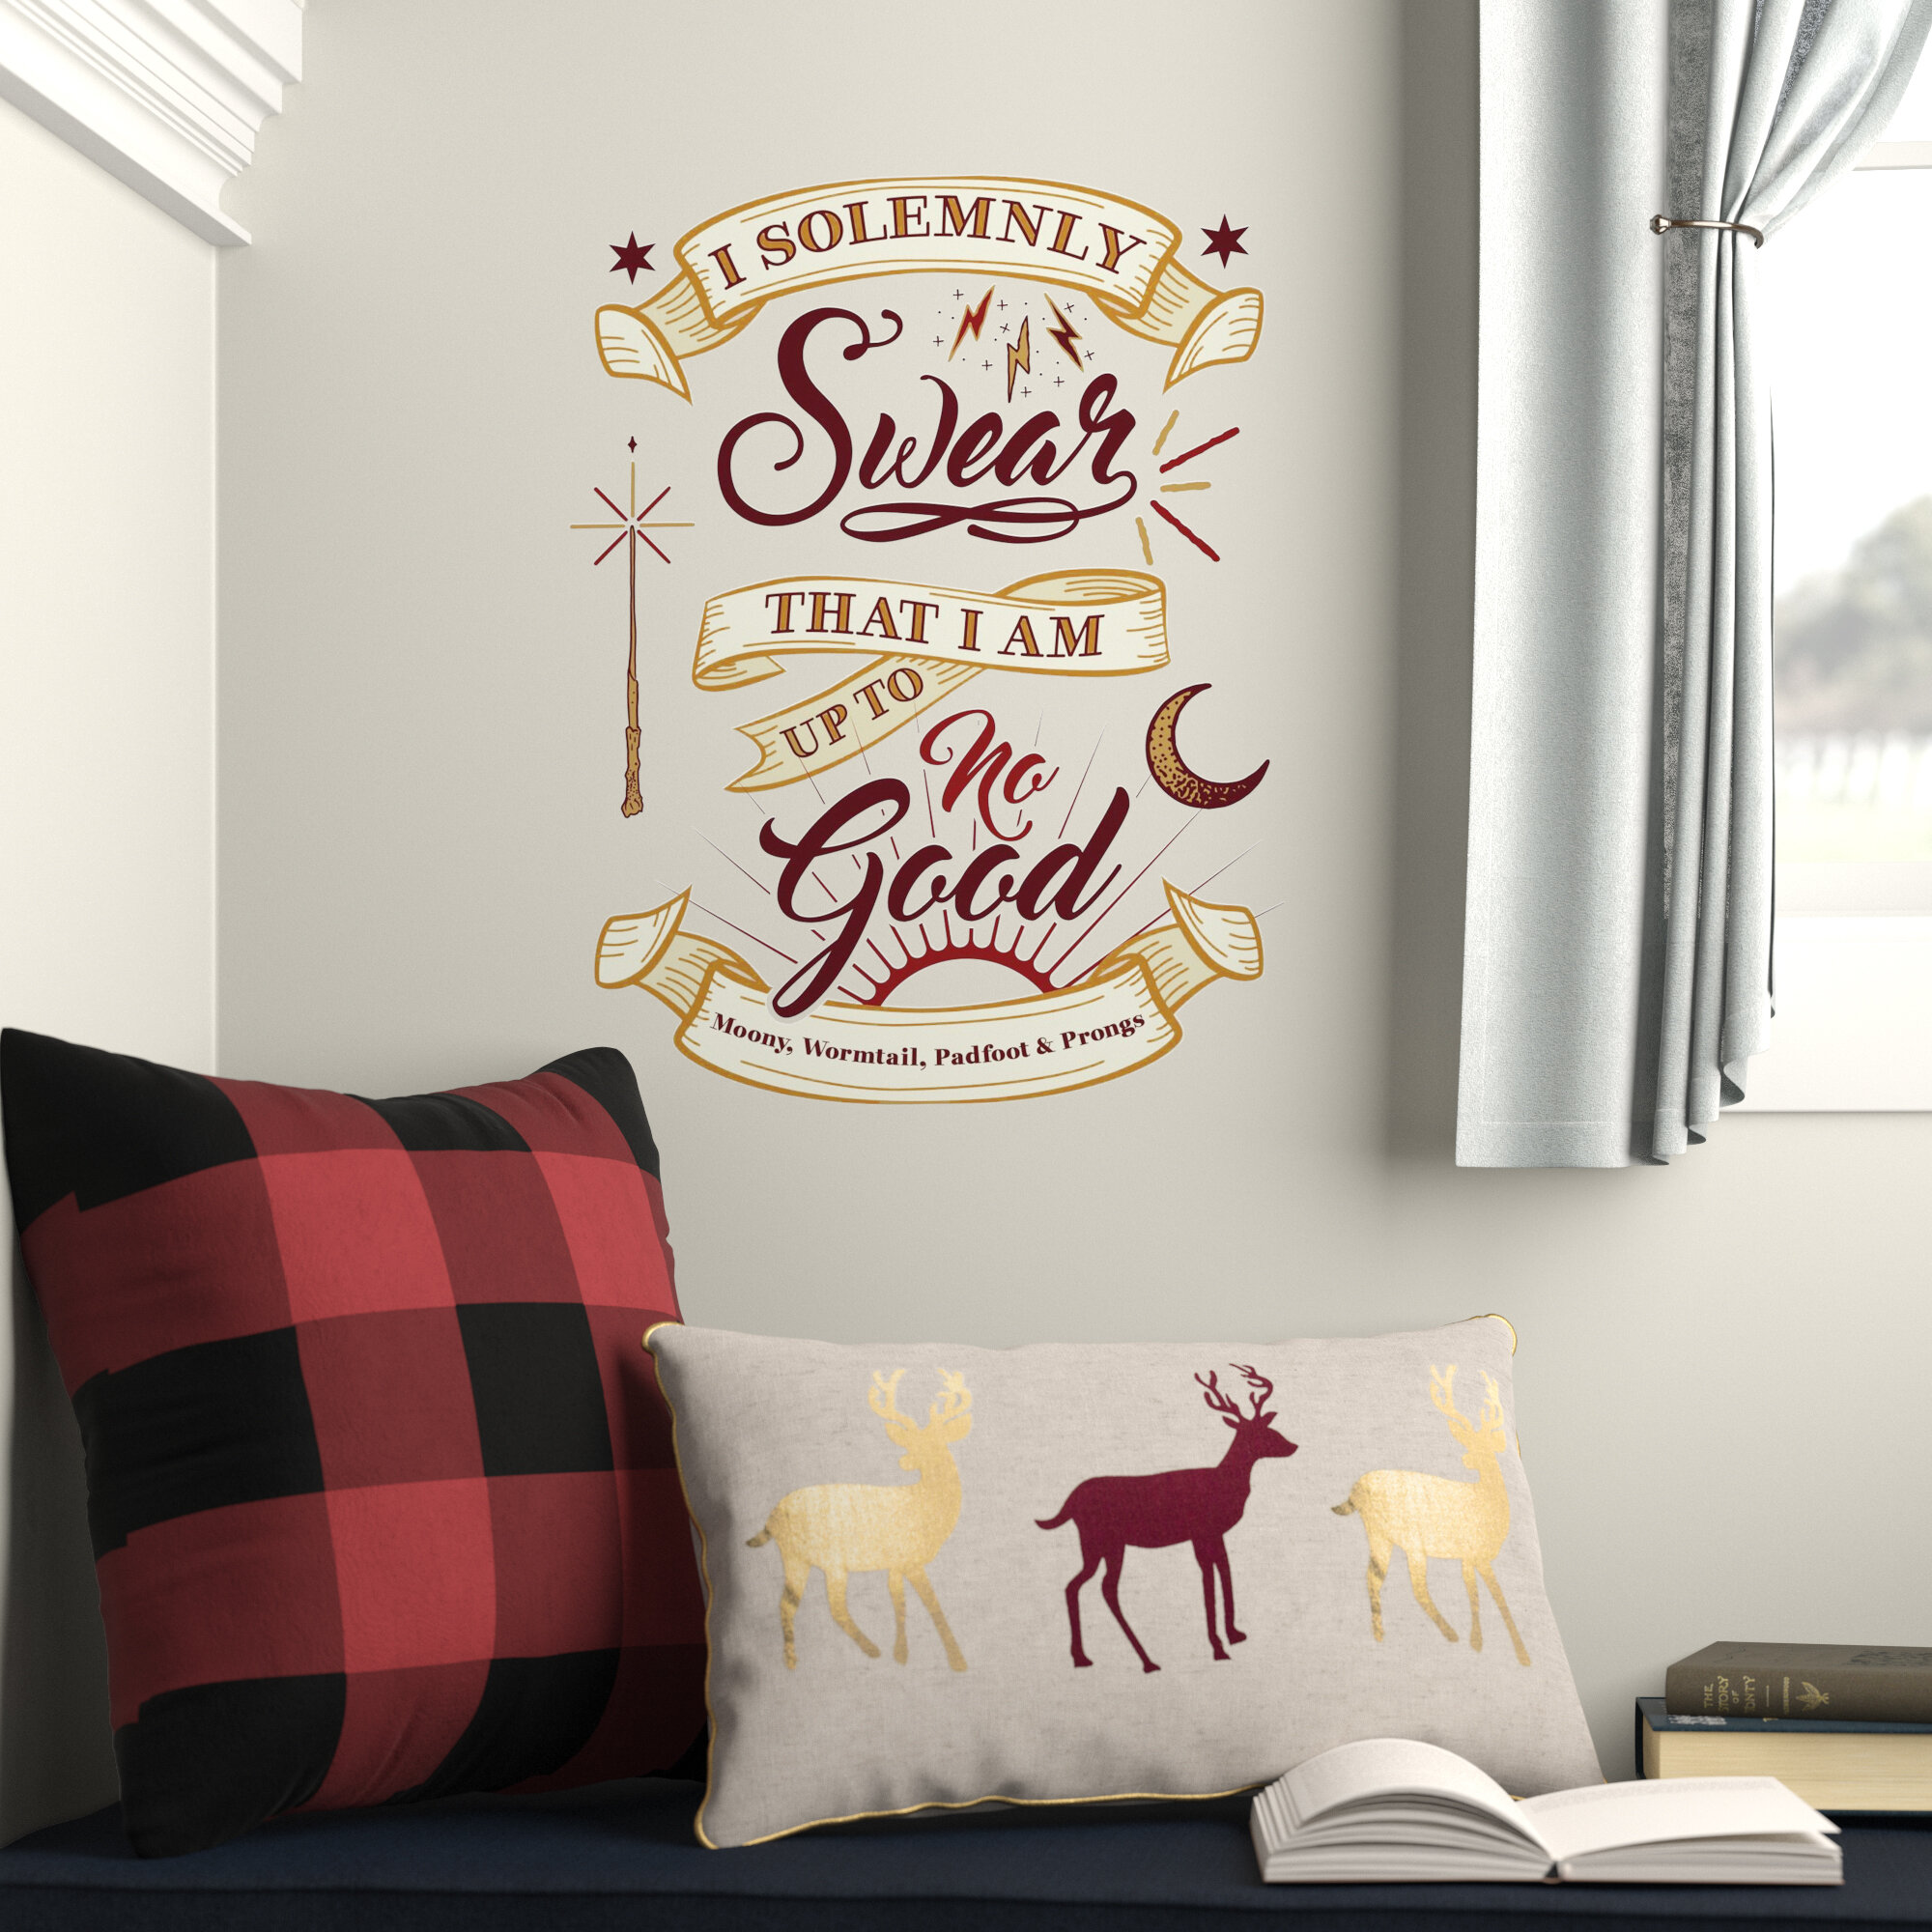 Harry potter wall stickers